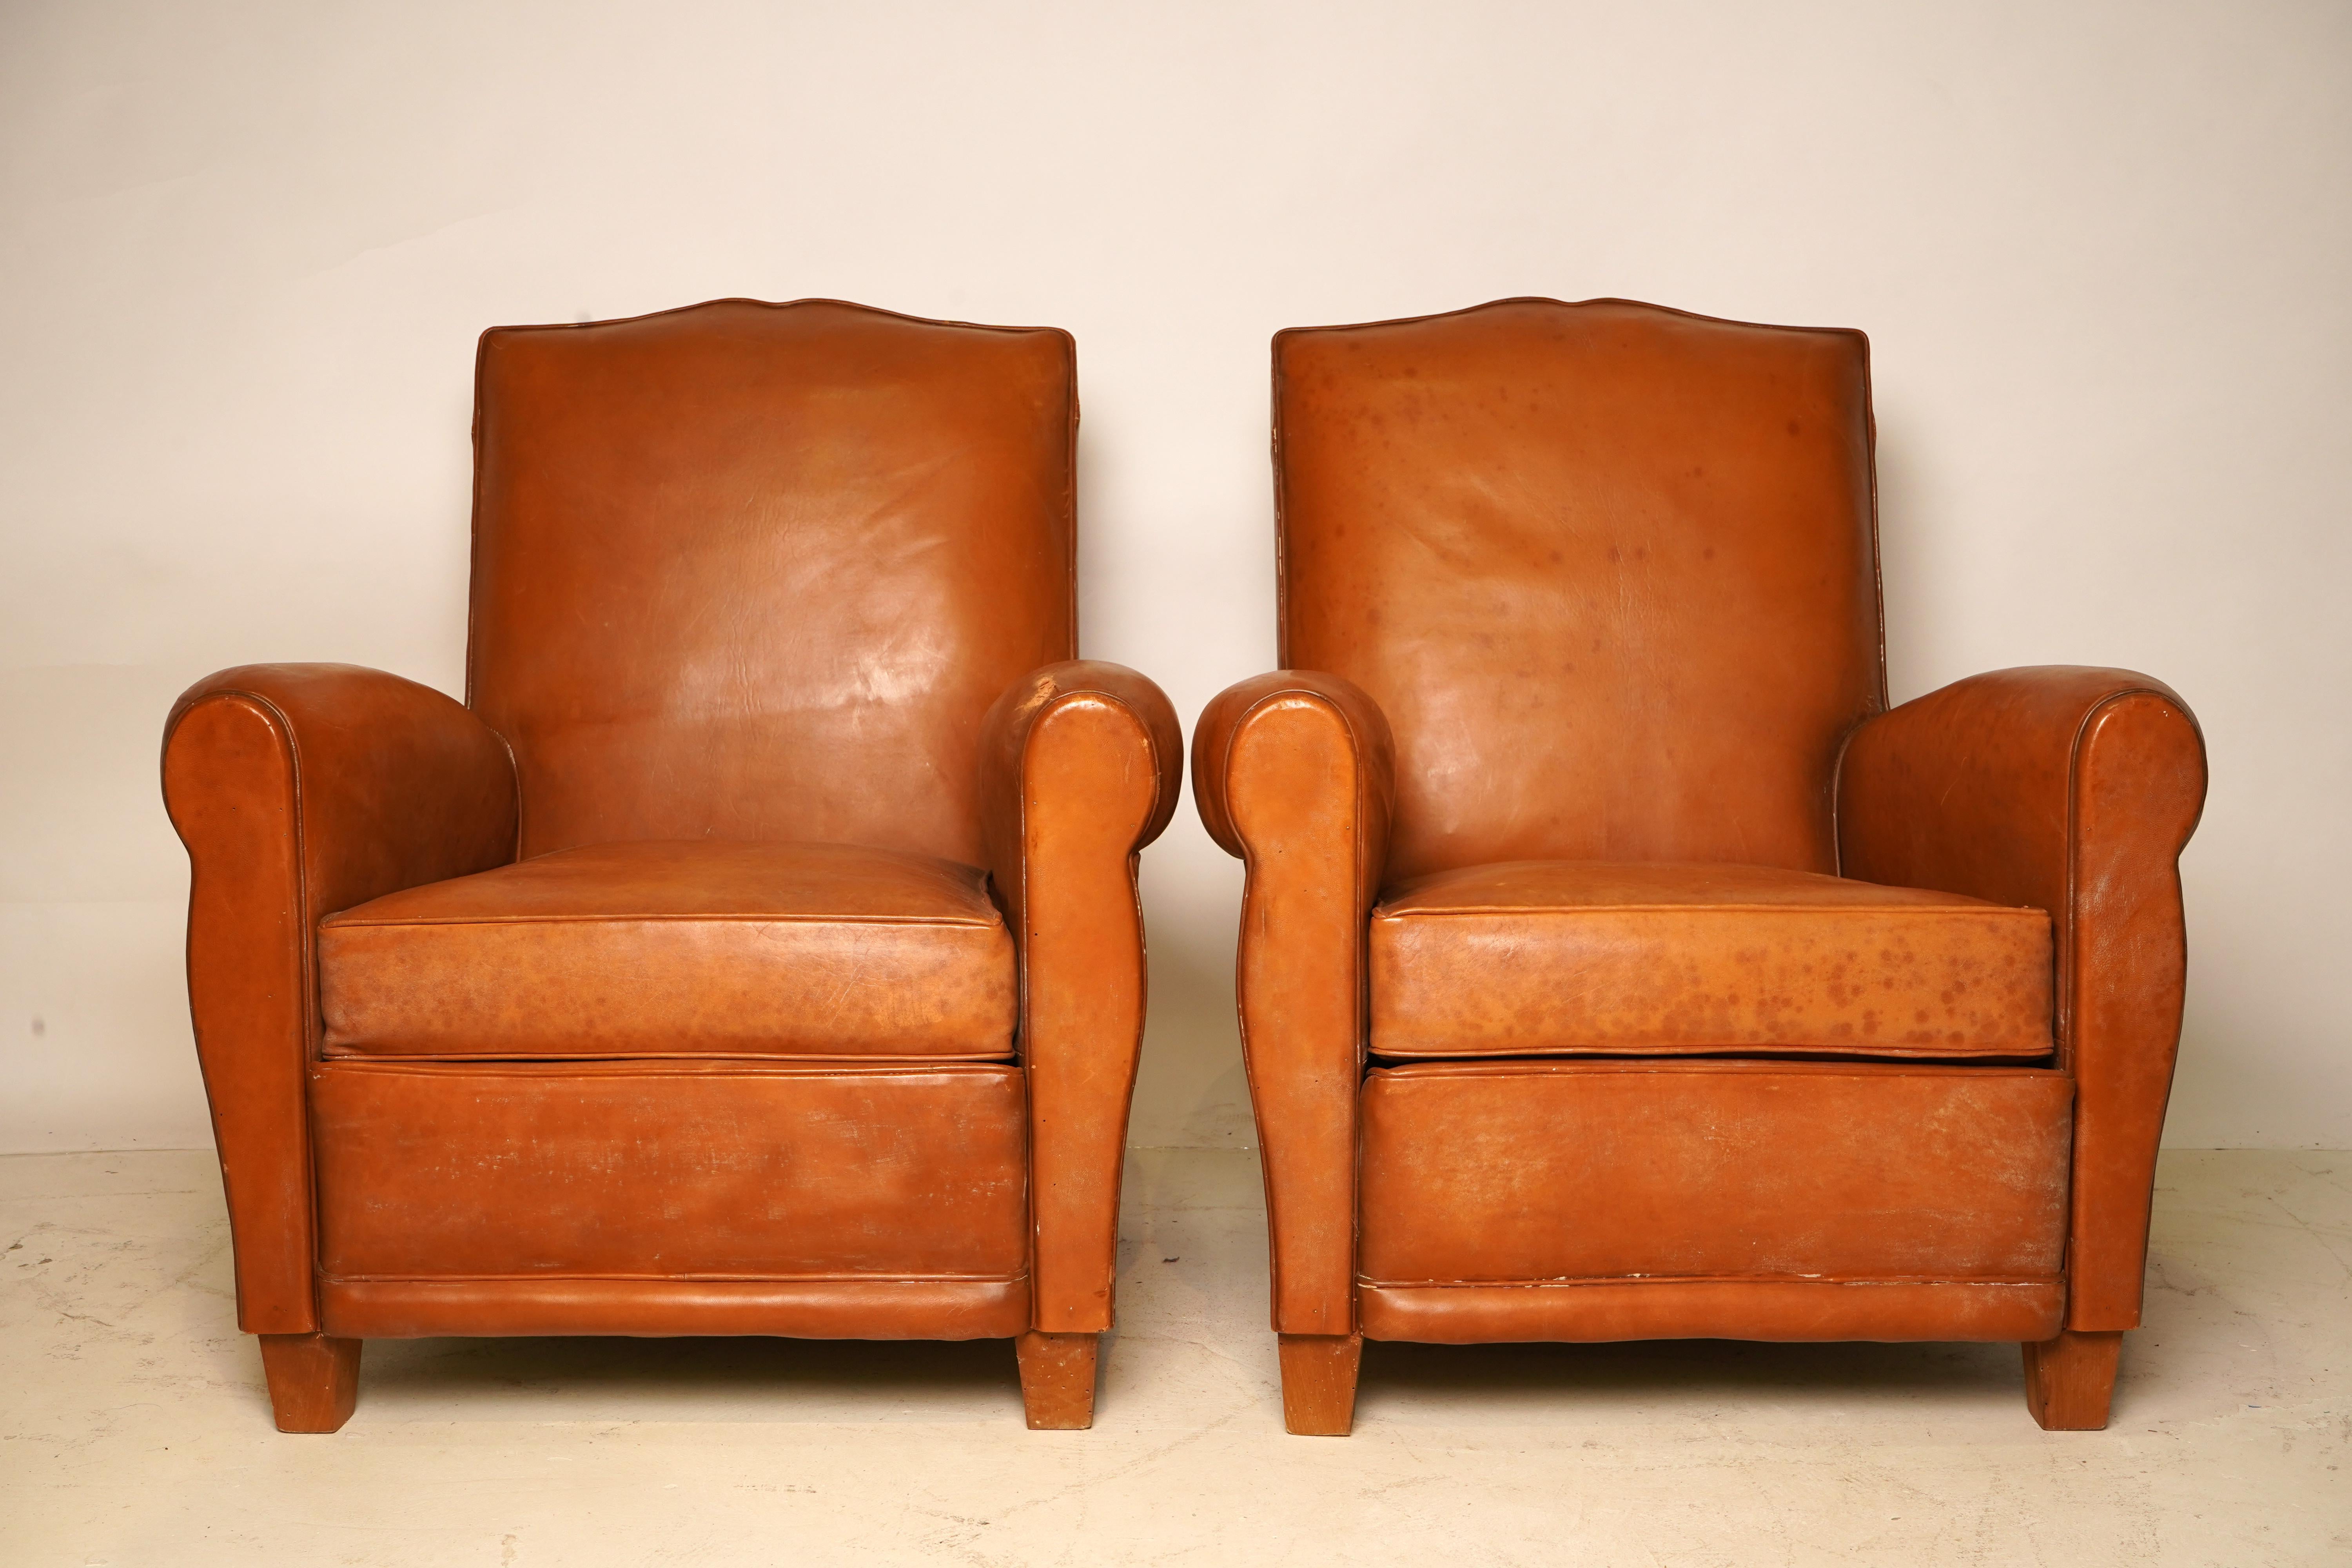 A vintage pair of French Art Deco leather club chairs with original patina. The sheep's leather has been gently cleaned and conditioned. The chairs have a superb 1940's modern shape and modest and tasteful proportions. They harmonize very well with